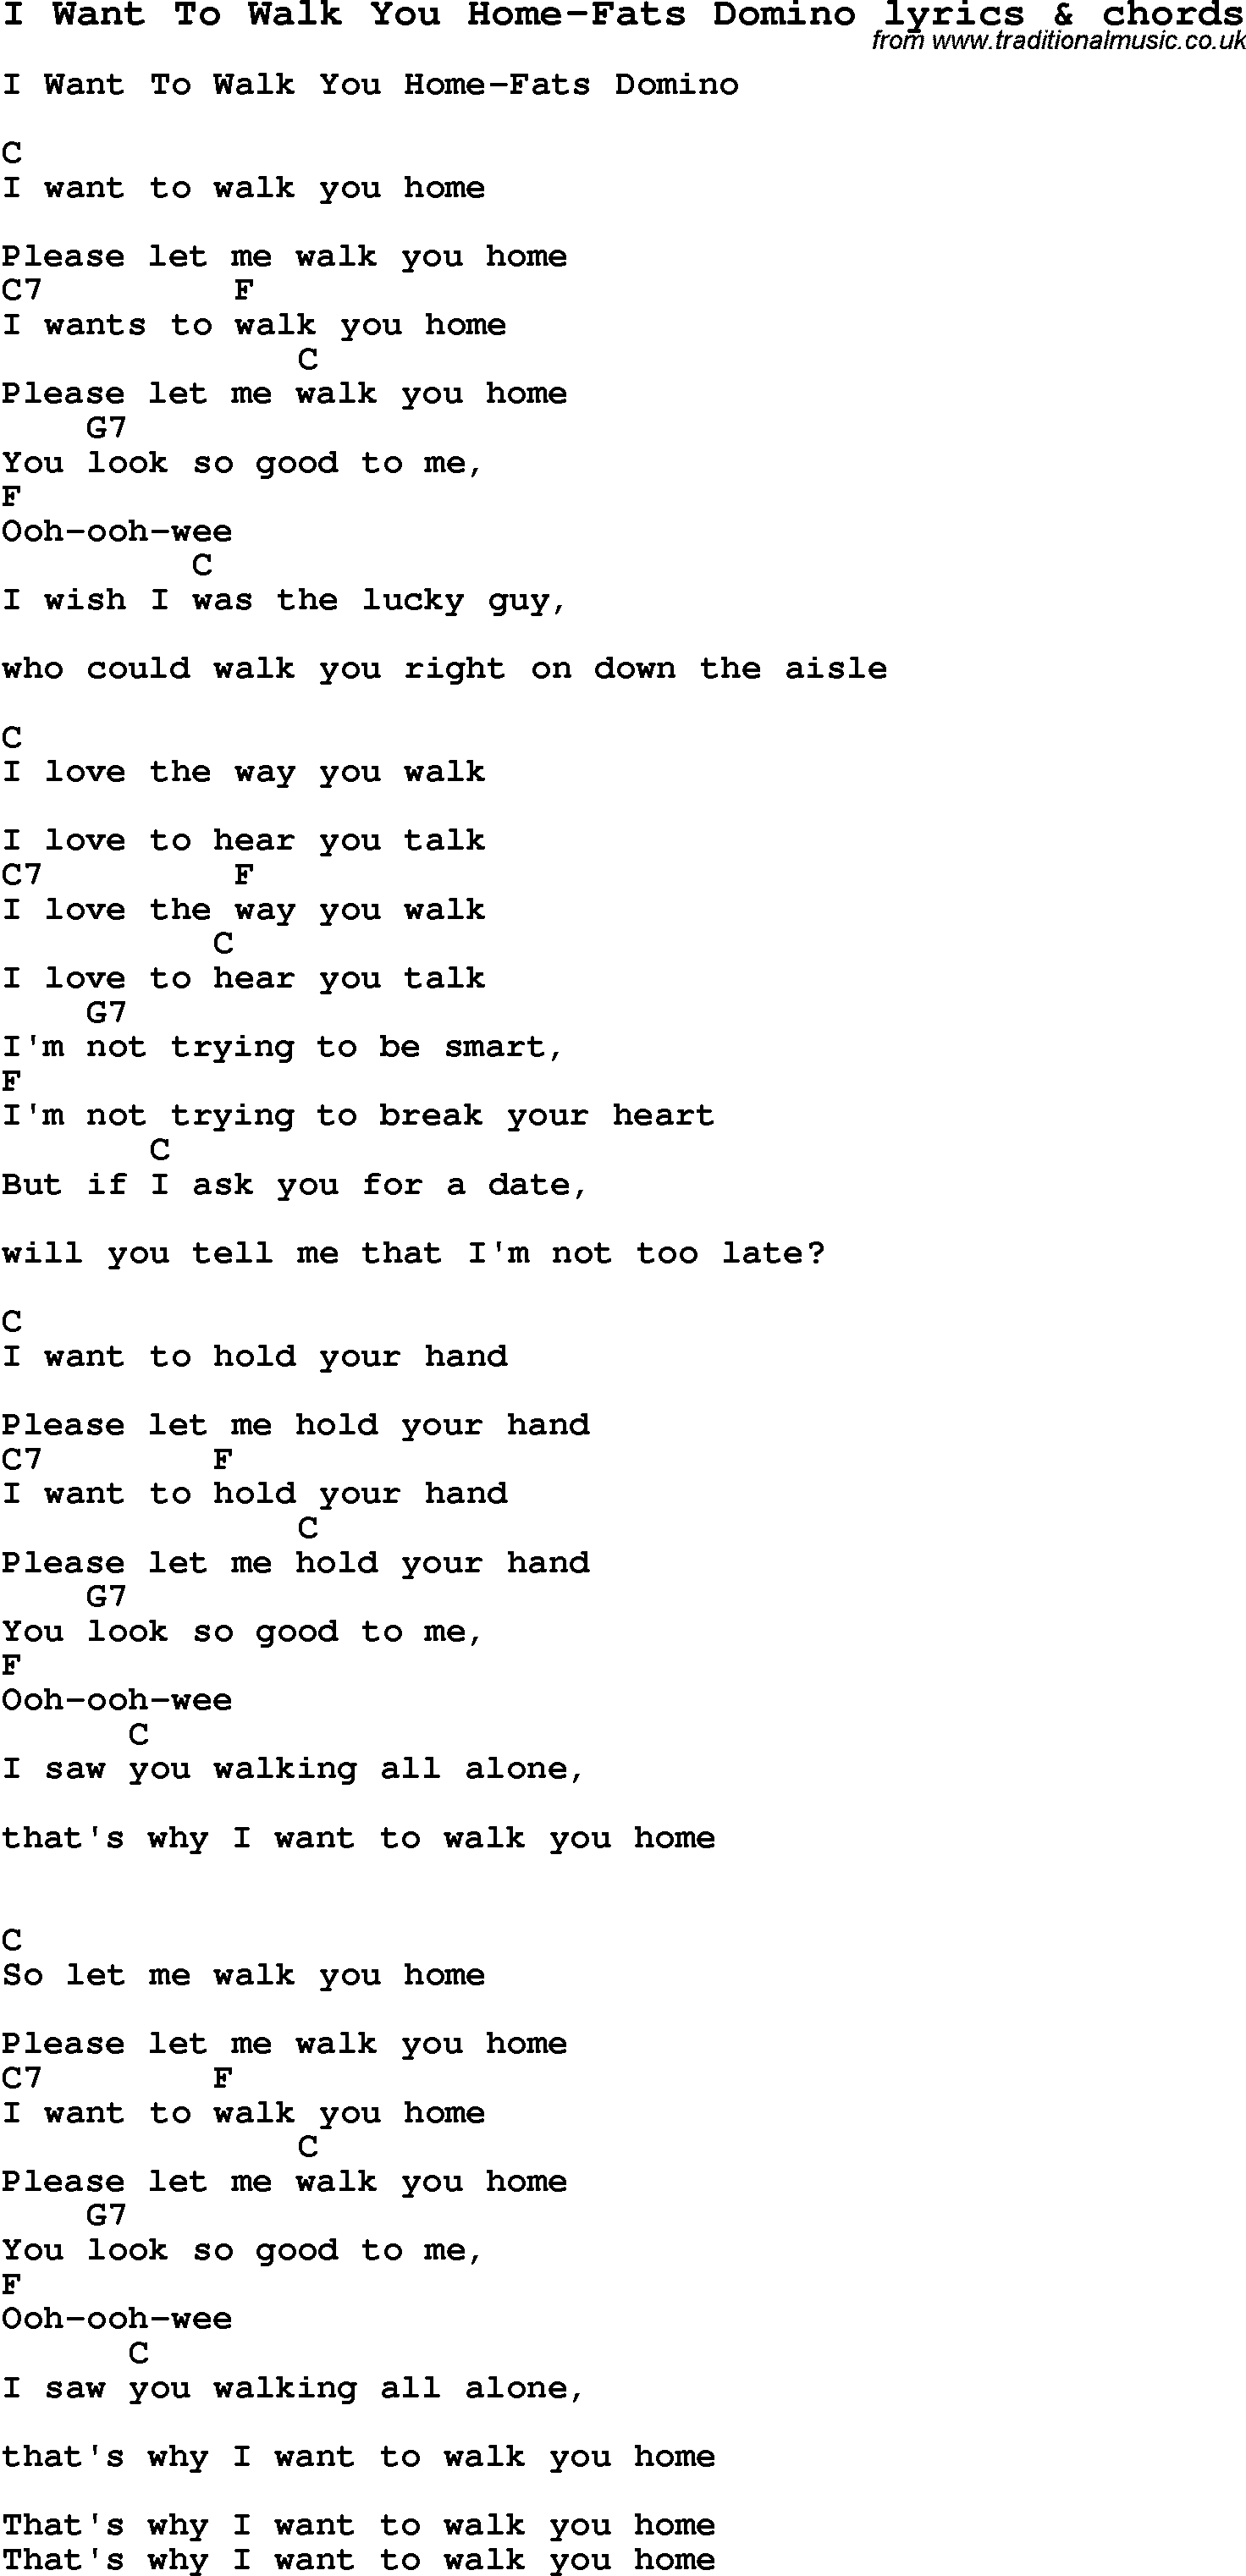 Love Song Lyrics for: I Want To Walk You Home-Fats Domino with chords for Ukulele, Guitar Banjo etc.